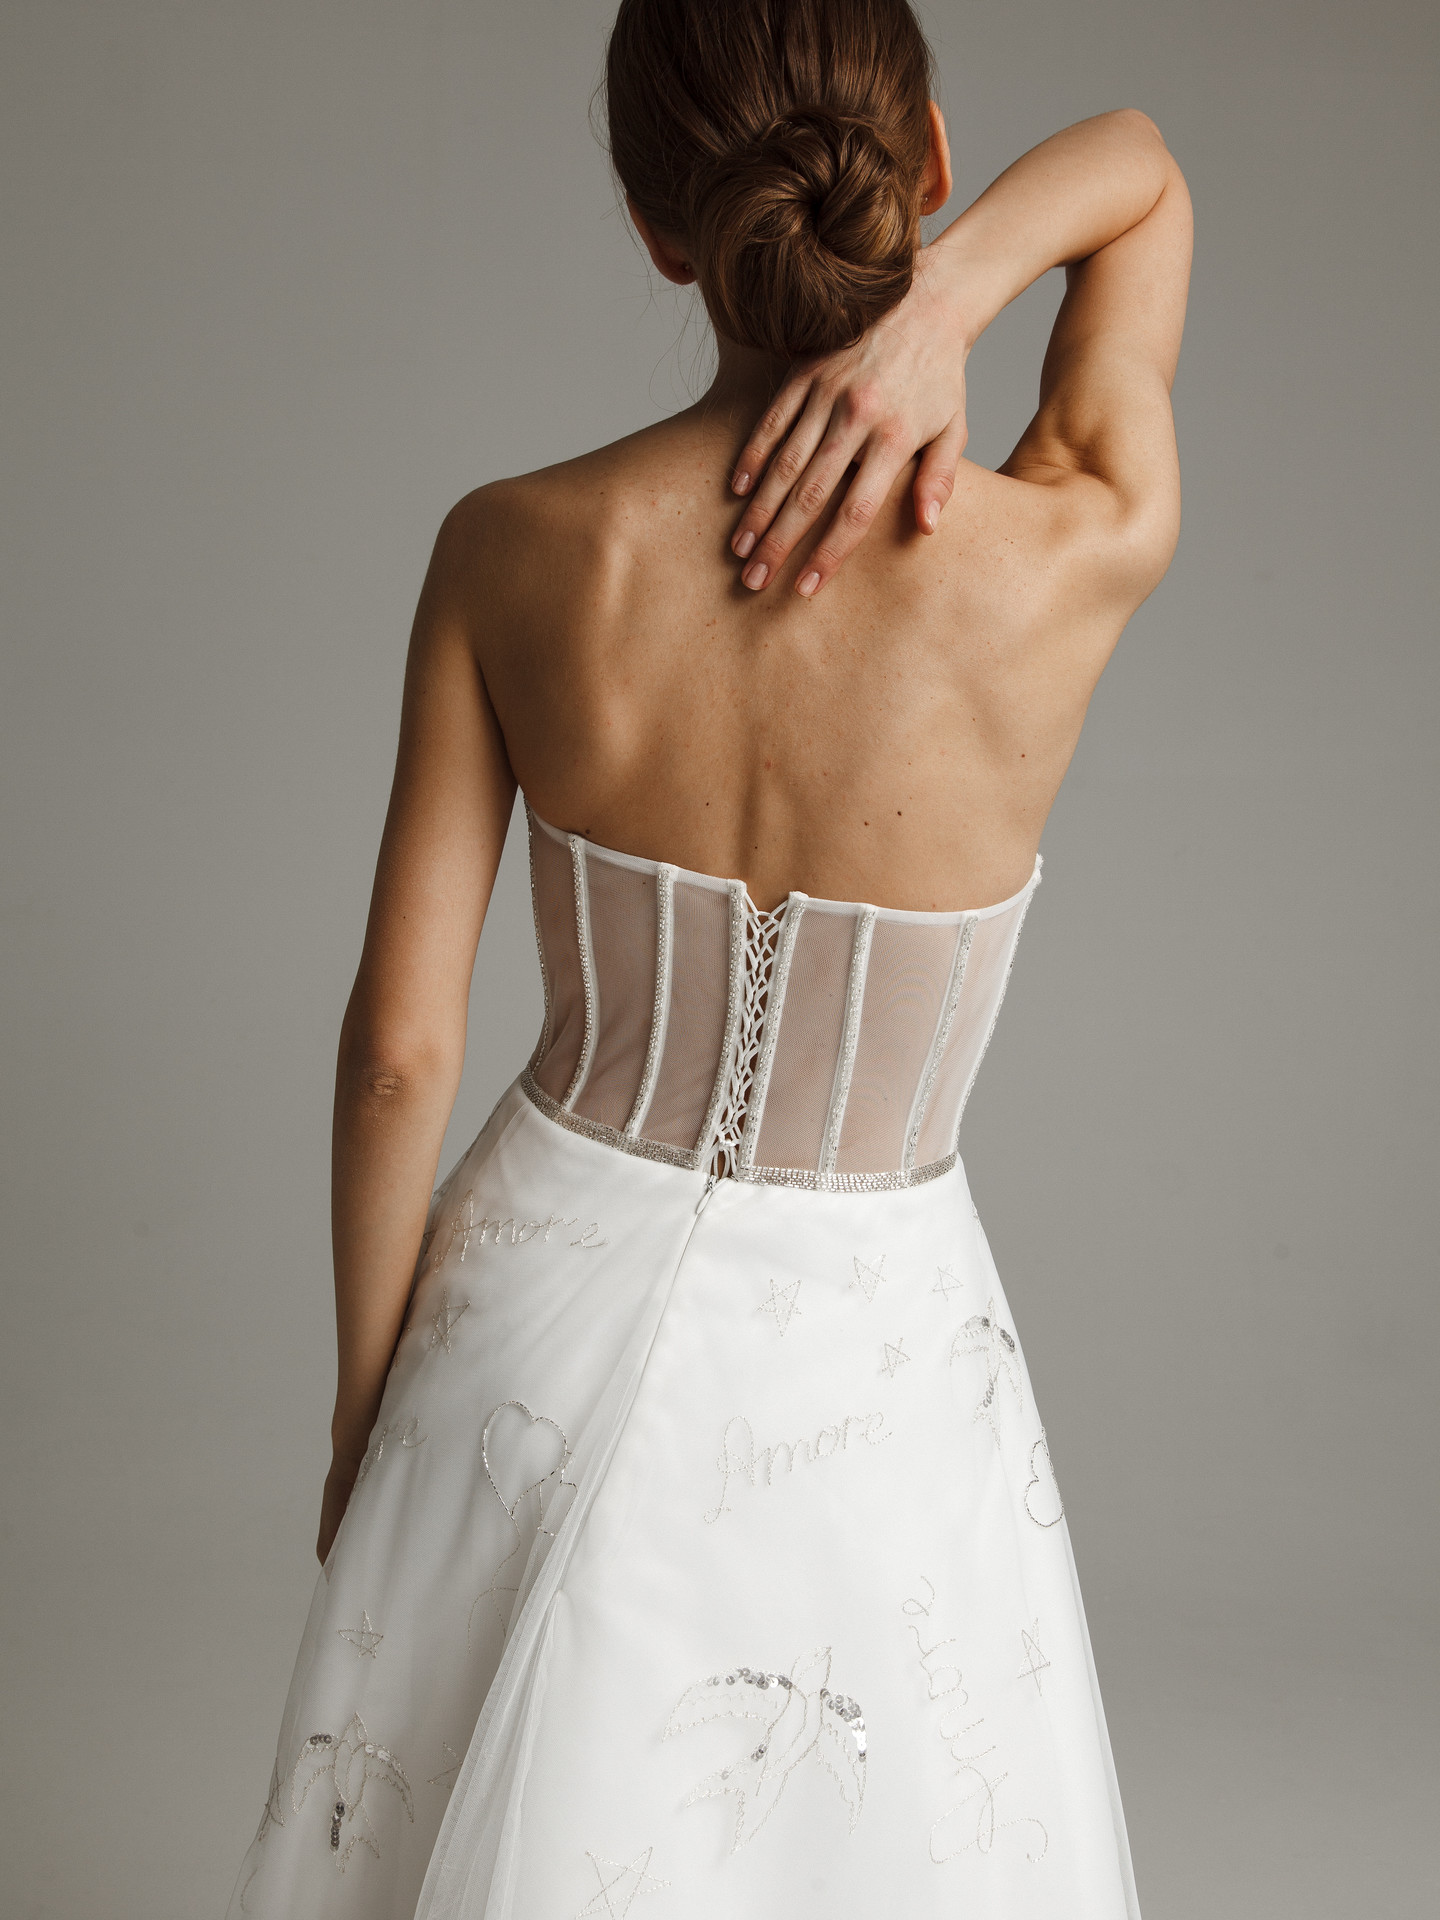 Amoret gown, 2021, couture, dress, bridal, off-white, A-line, embroidery, lacing corset